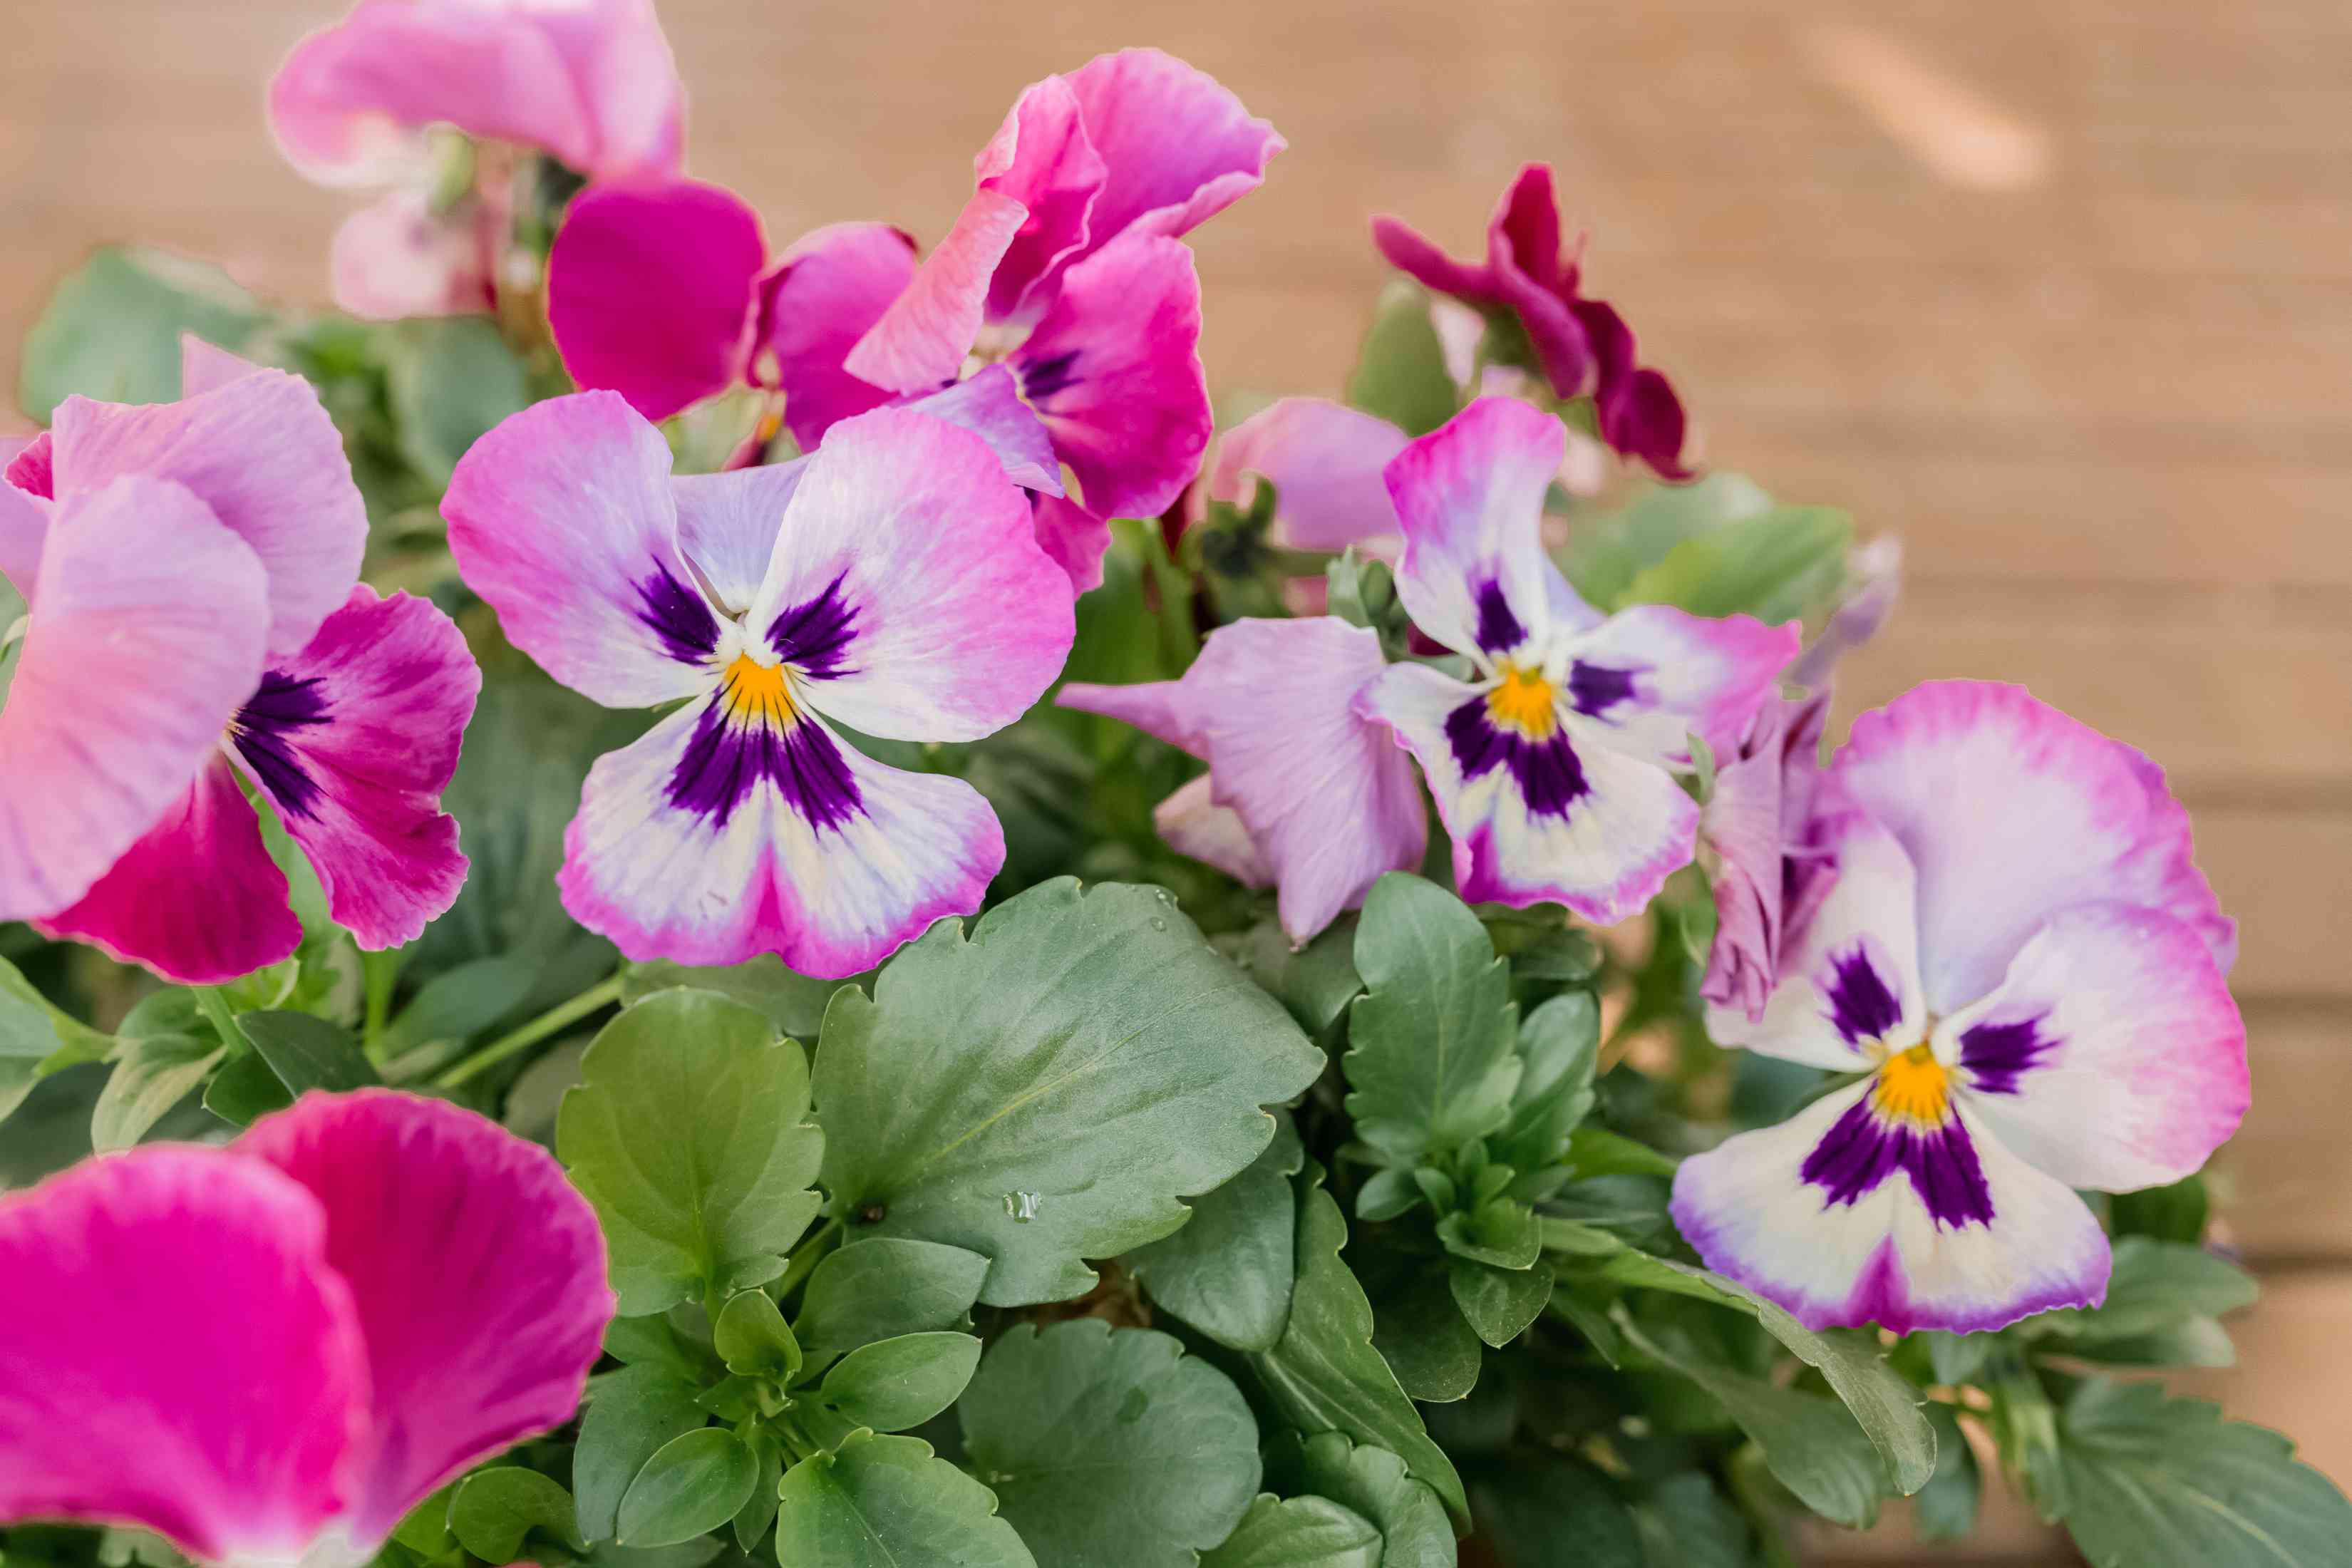 How To Grow Pansies From Seed